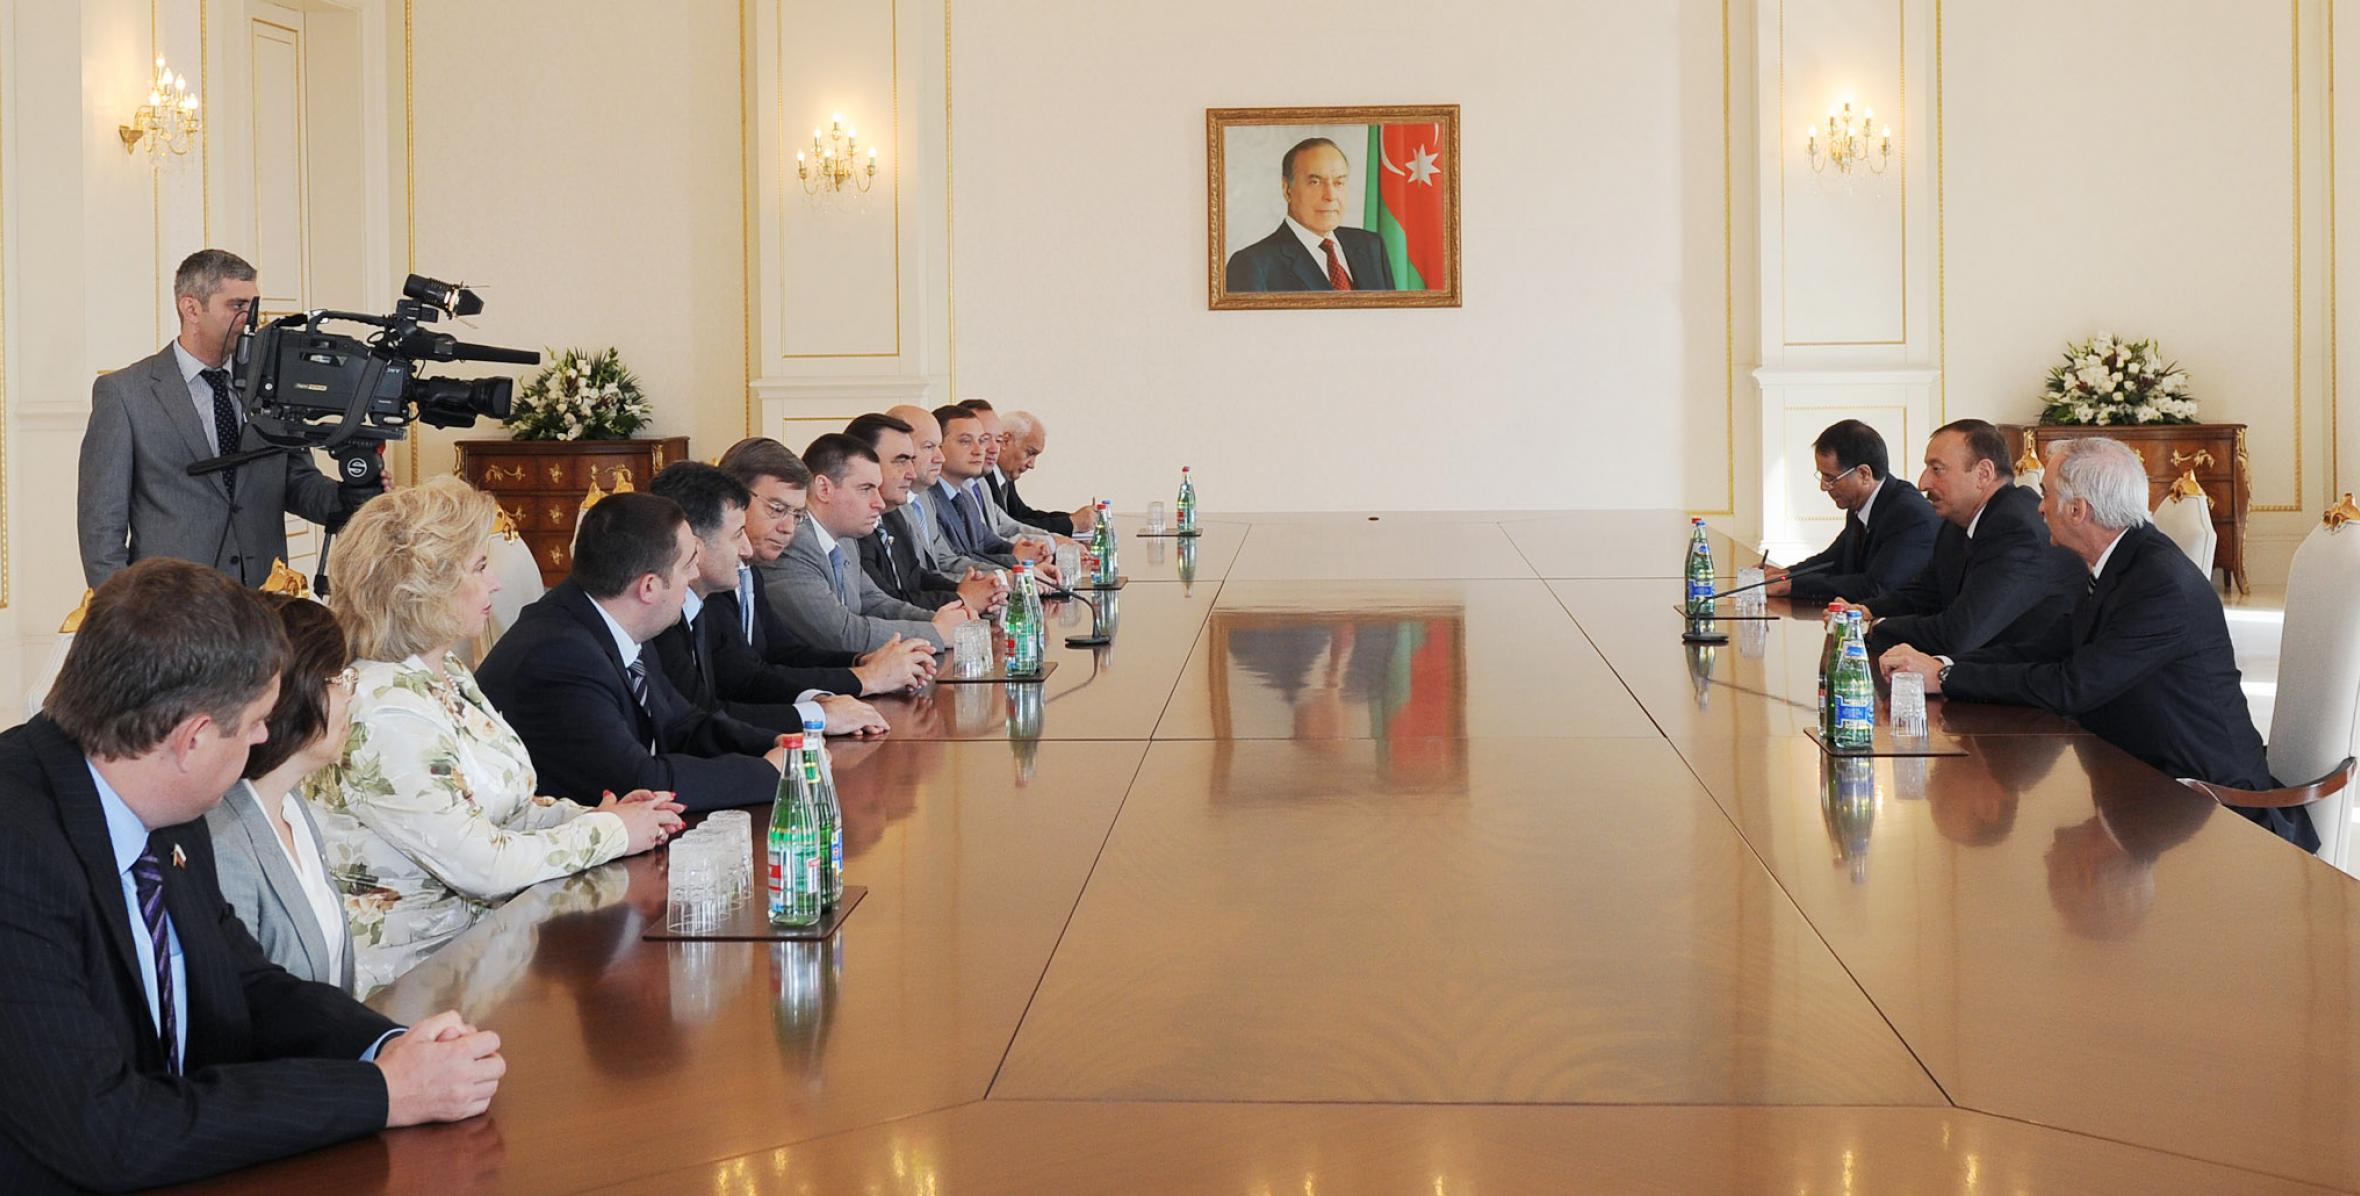 Ilham Aliyev received a delegation led by the chairman of the Russian State Duma committee for CIS affairs and relations with compatriots